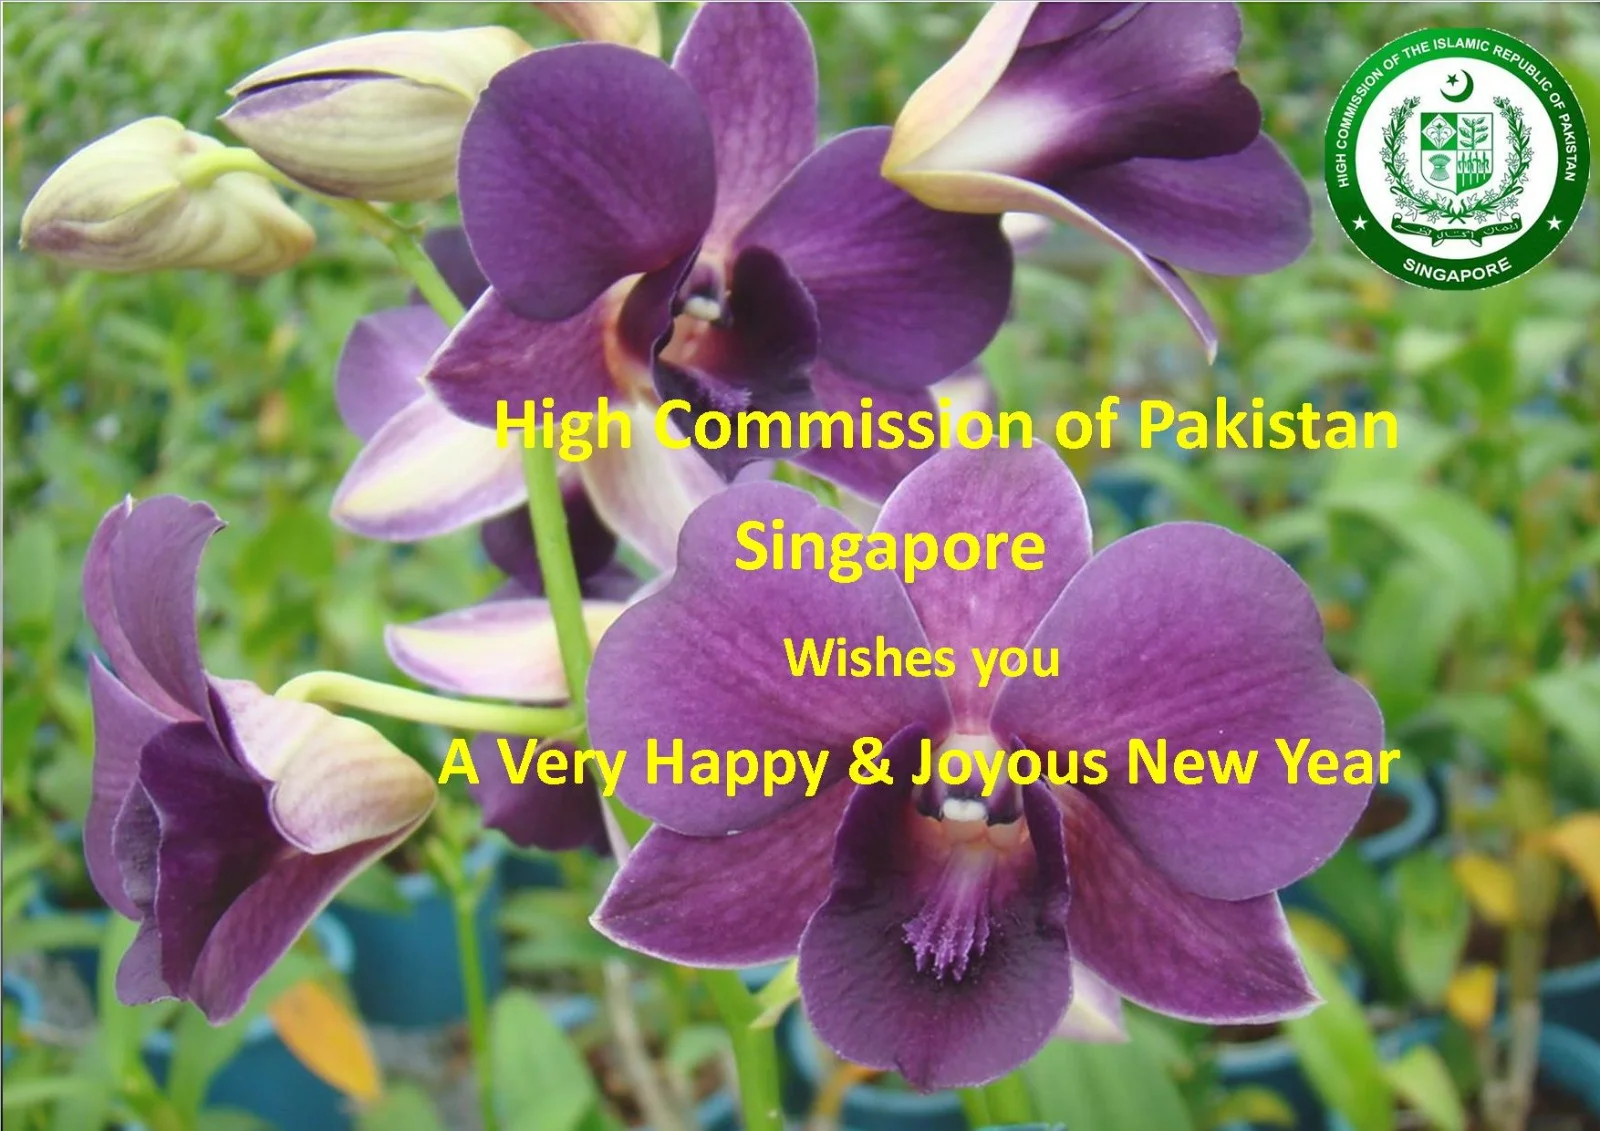 New Year Greetings from High Commission of Pakistan, Singapore!